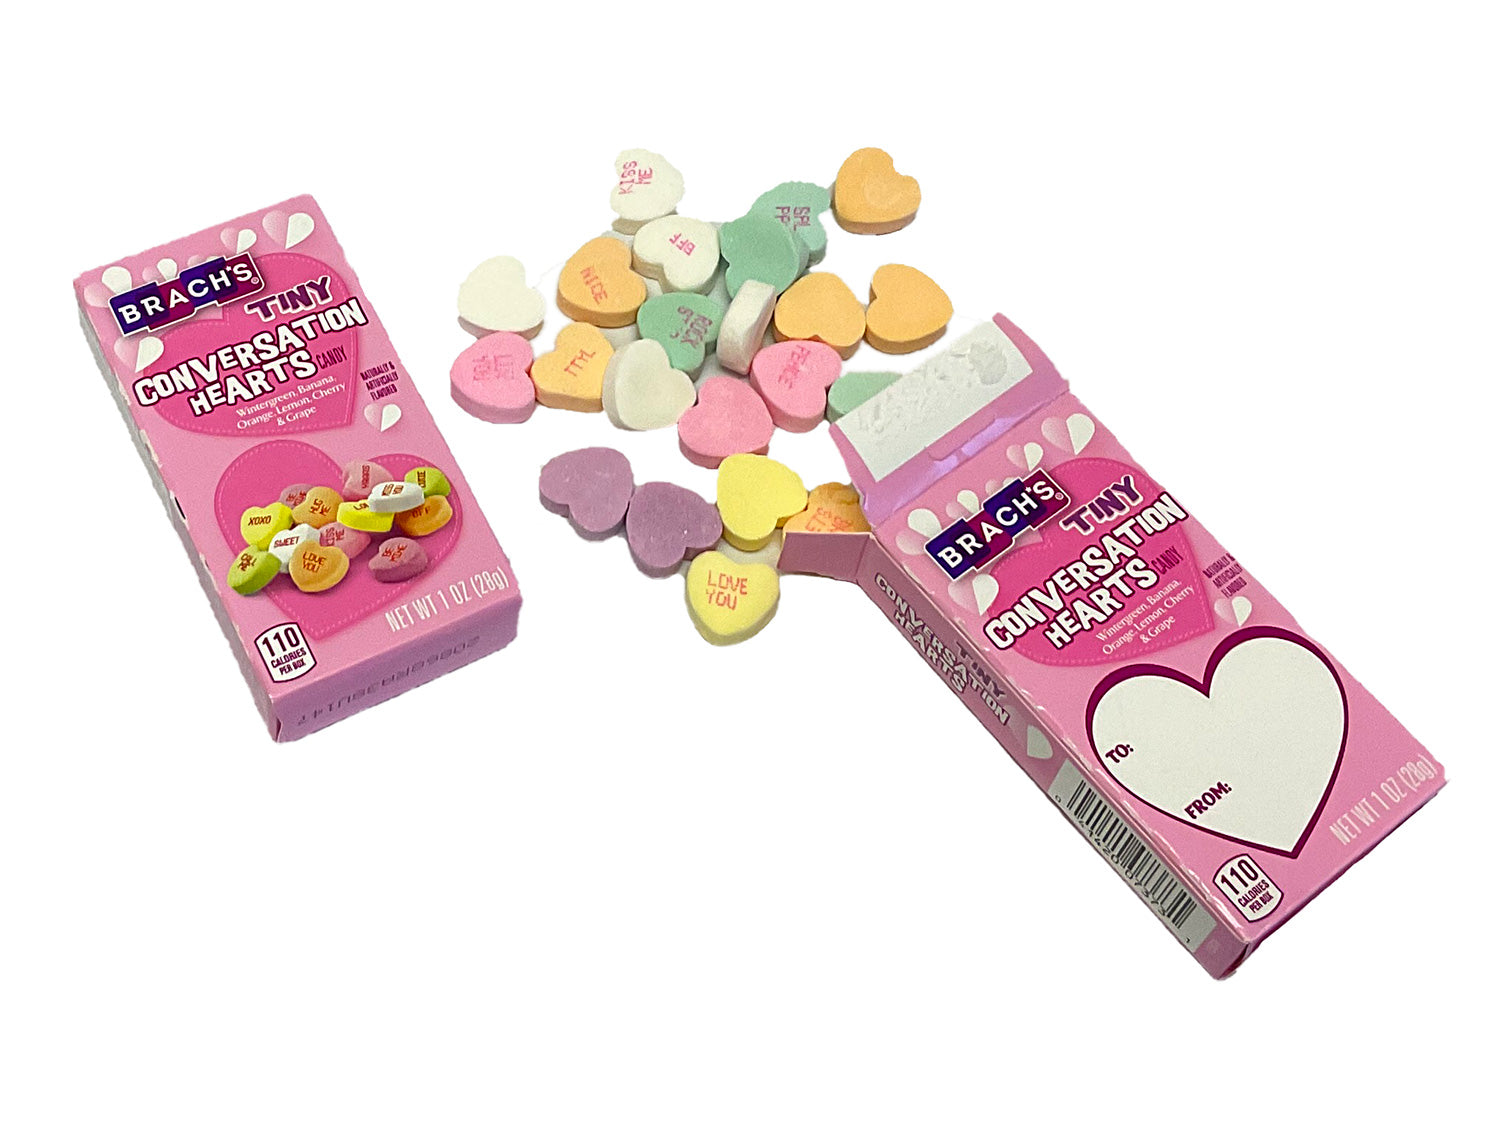 1 Box of Mini Conversation Hearts Candy Hearts for Valentine's Day